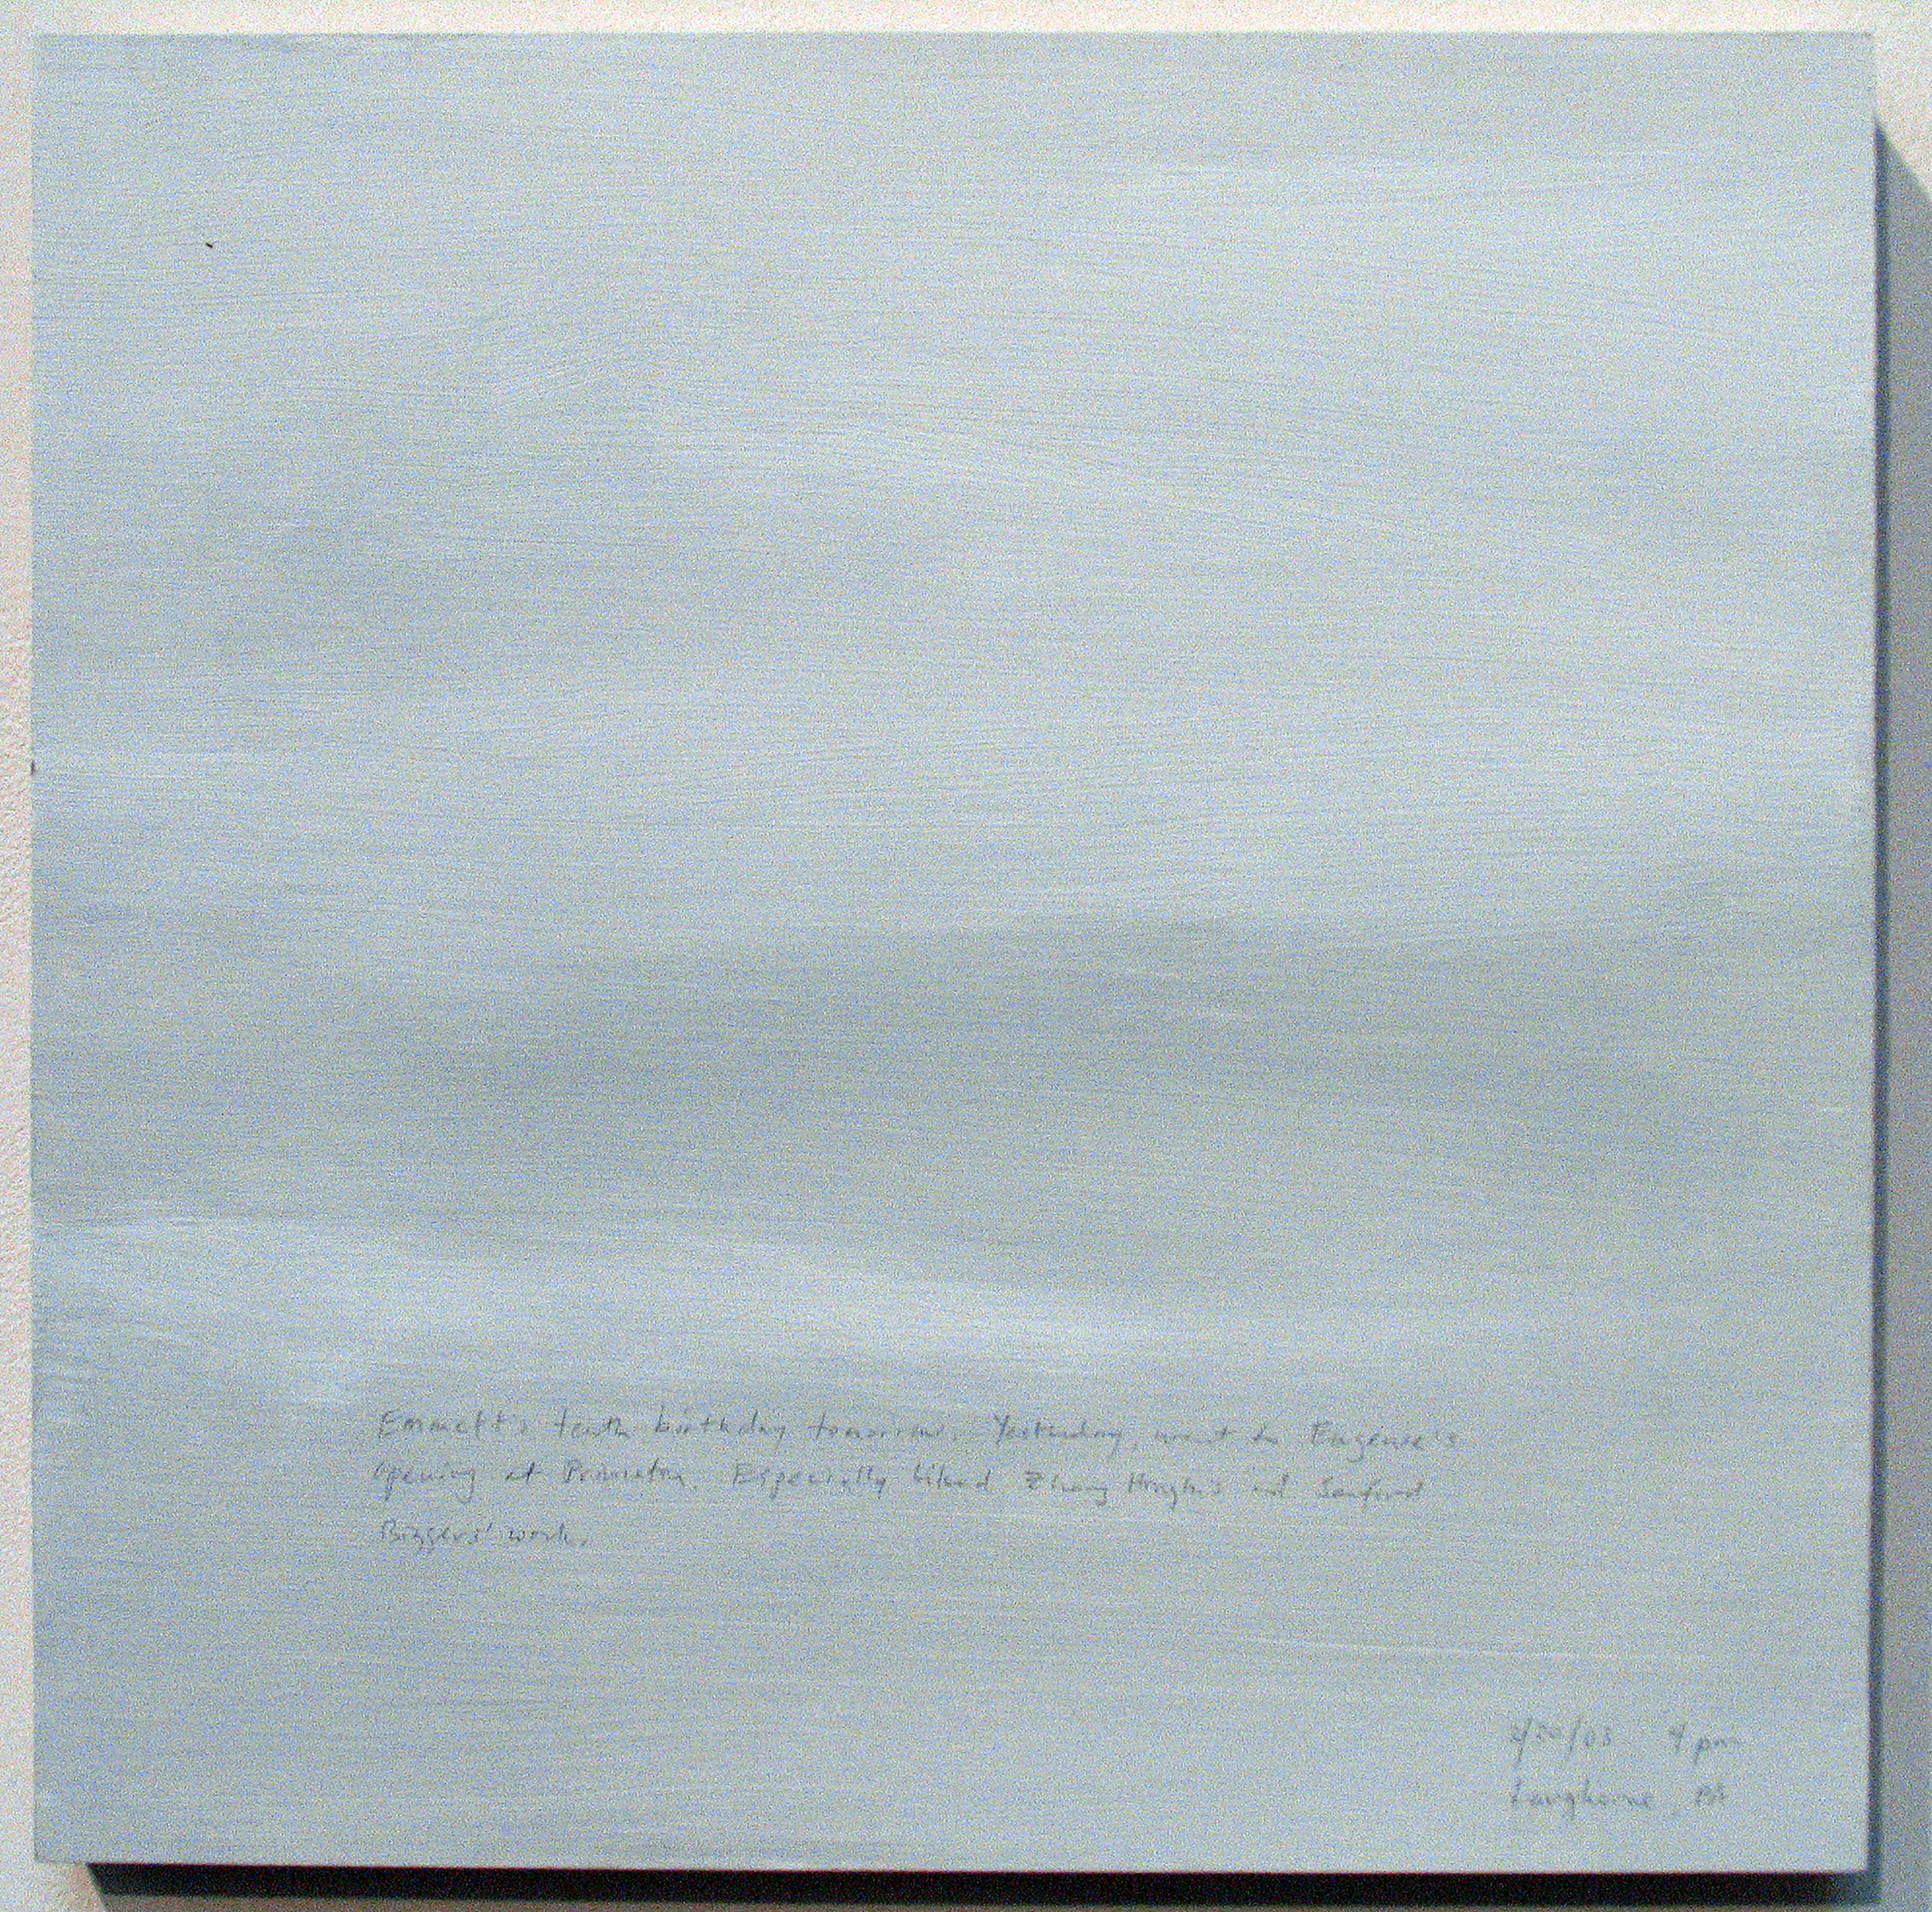 A 14 × 14 inch, acrylic painting of the sky. A journal entry is handwritten on the painting:

“Emmett’s tenth birthday tomorrow. Yesterday, went to Eugenie’s opening at Princeton. Especially like Zhang Hongtu’s and Sanford Biggers’ work.

3/30/03 4 pm
Langhorne, PA”